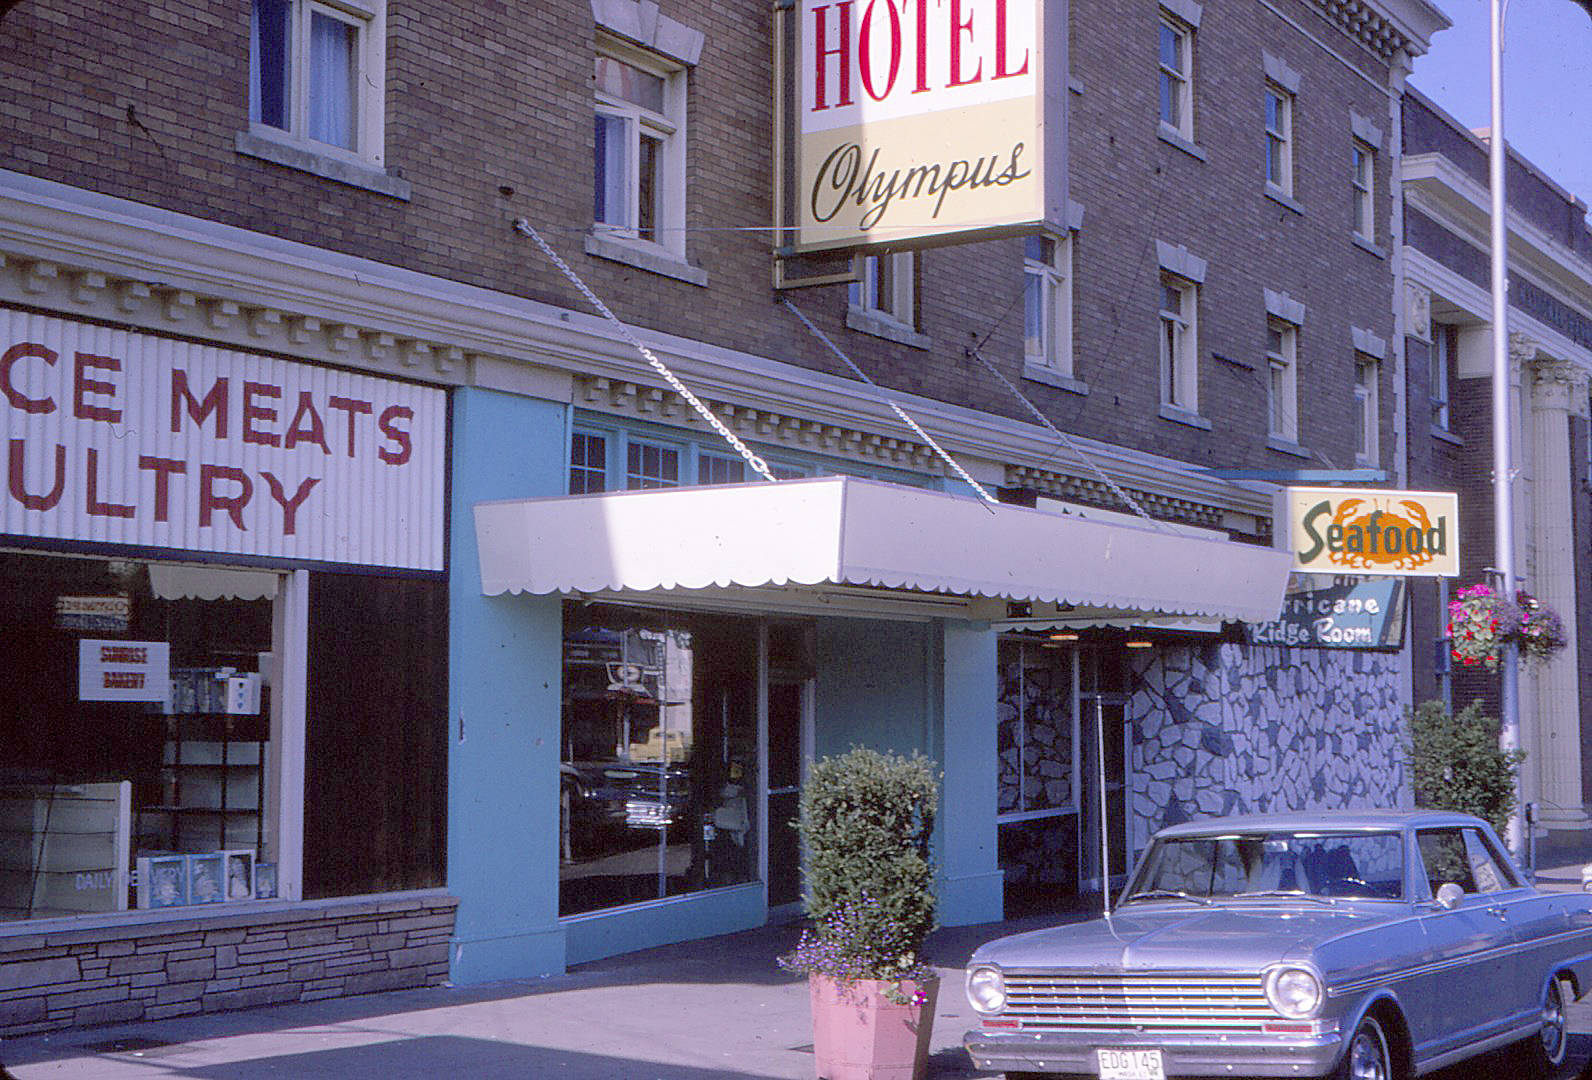 The Olympus Hotel before the 1971 gas explosion.